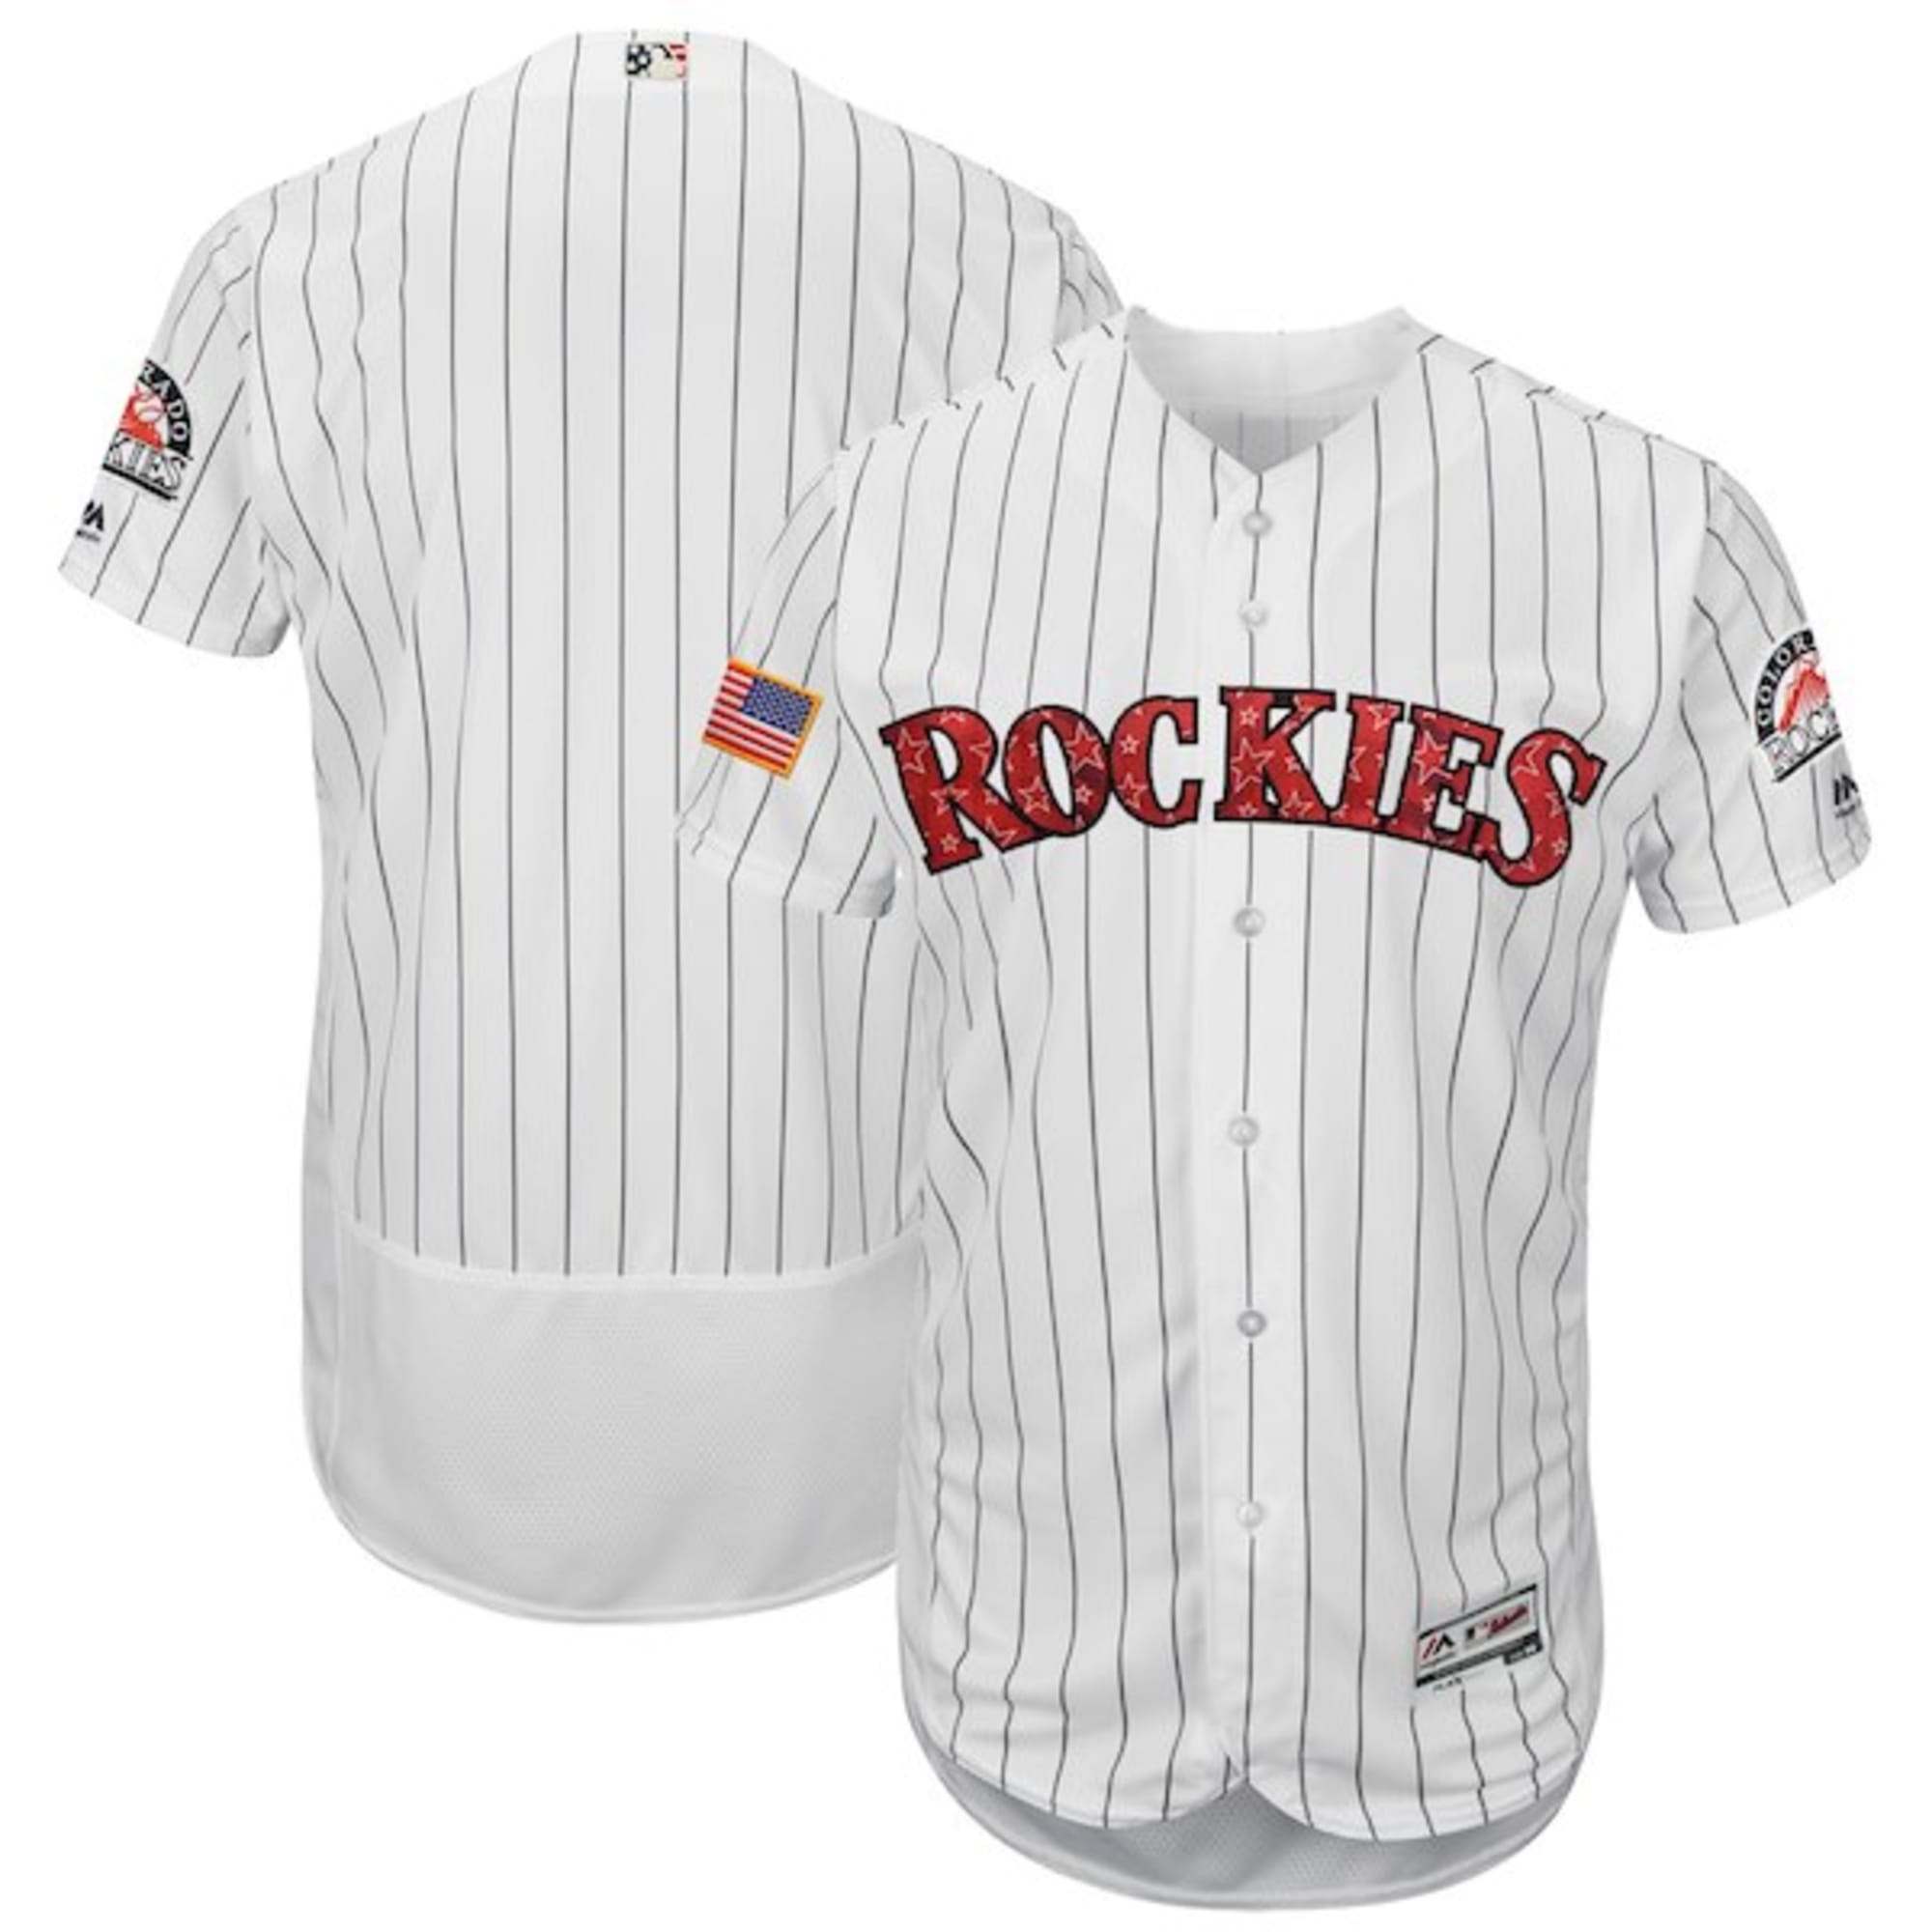 Colorado Rockies Blank or Custom Back 2-Button Cool Base Jersey 